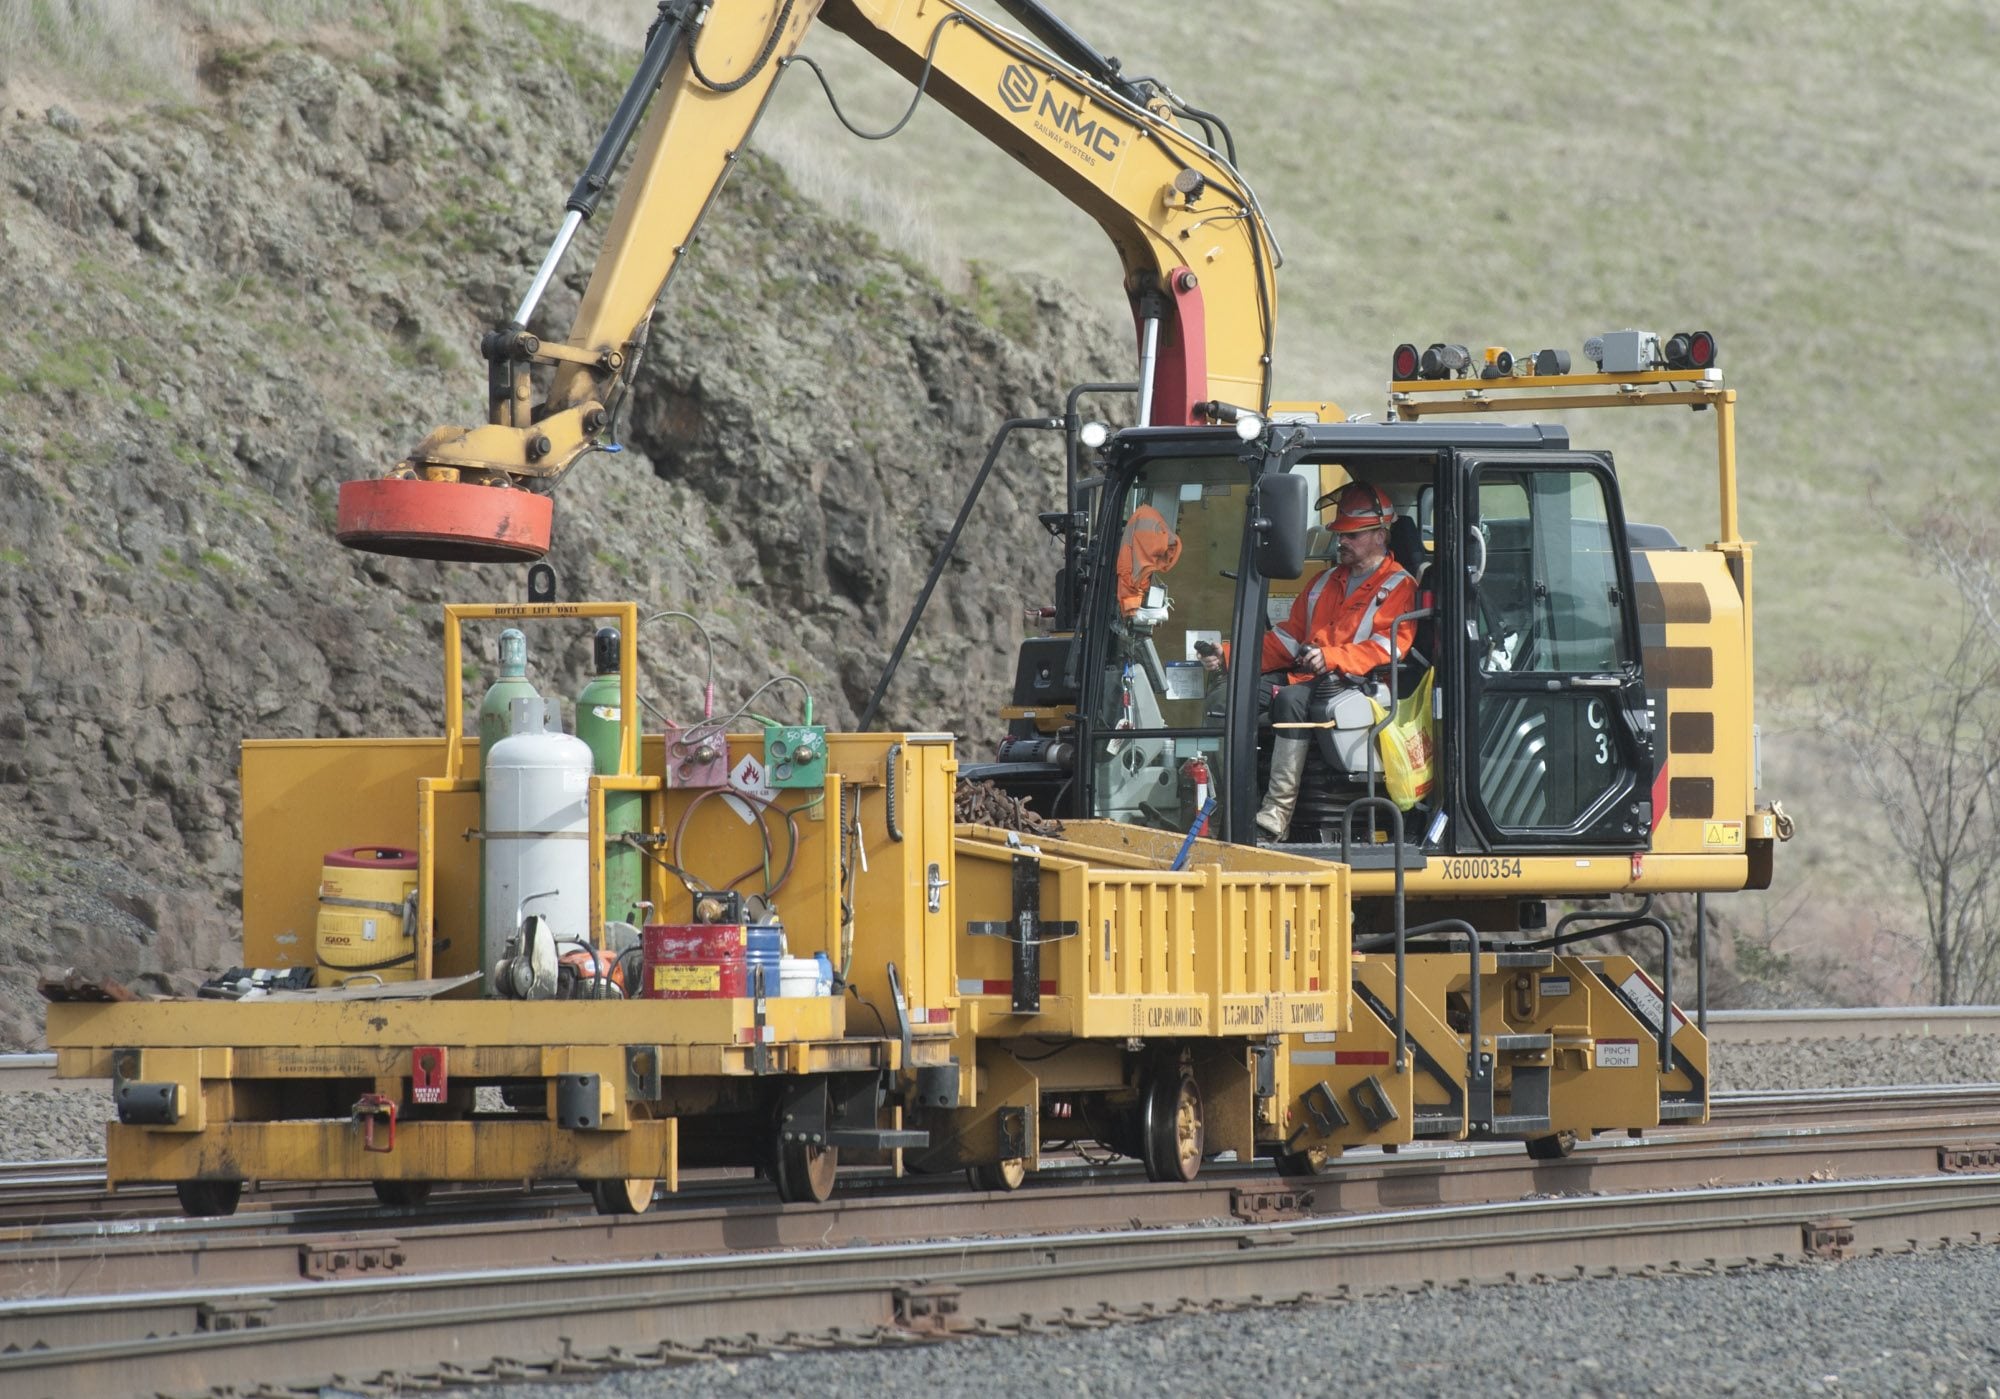 A worker uses an electromagnet to remove metal debris during BNSF rail upgrades in Wishram on Tuesday. The company is investing $220 million in infrastructure upgrades in Washington state.